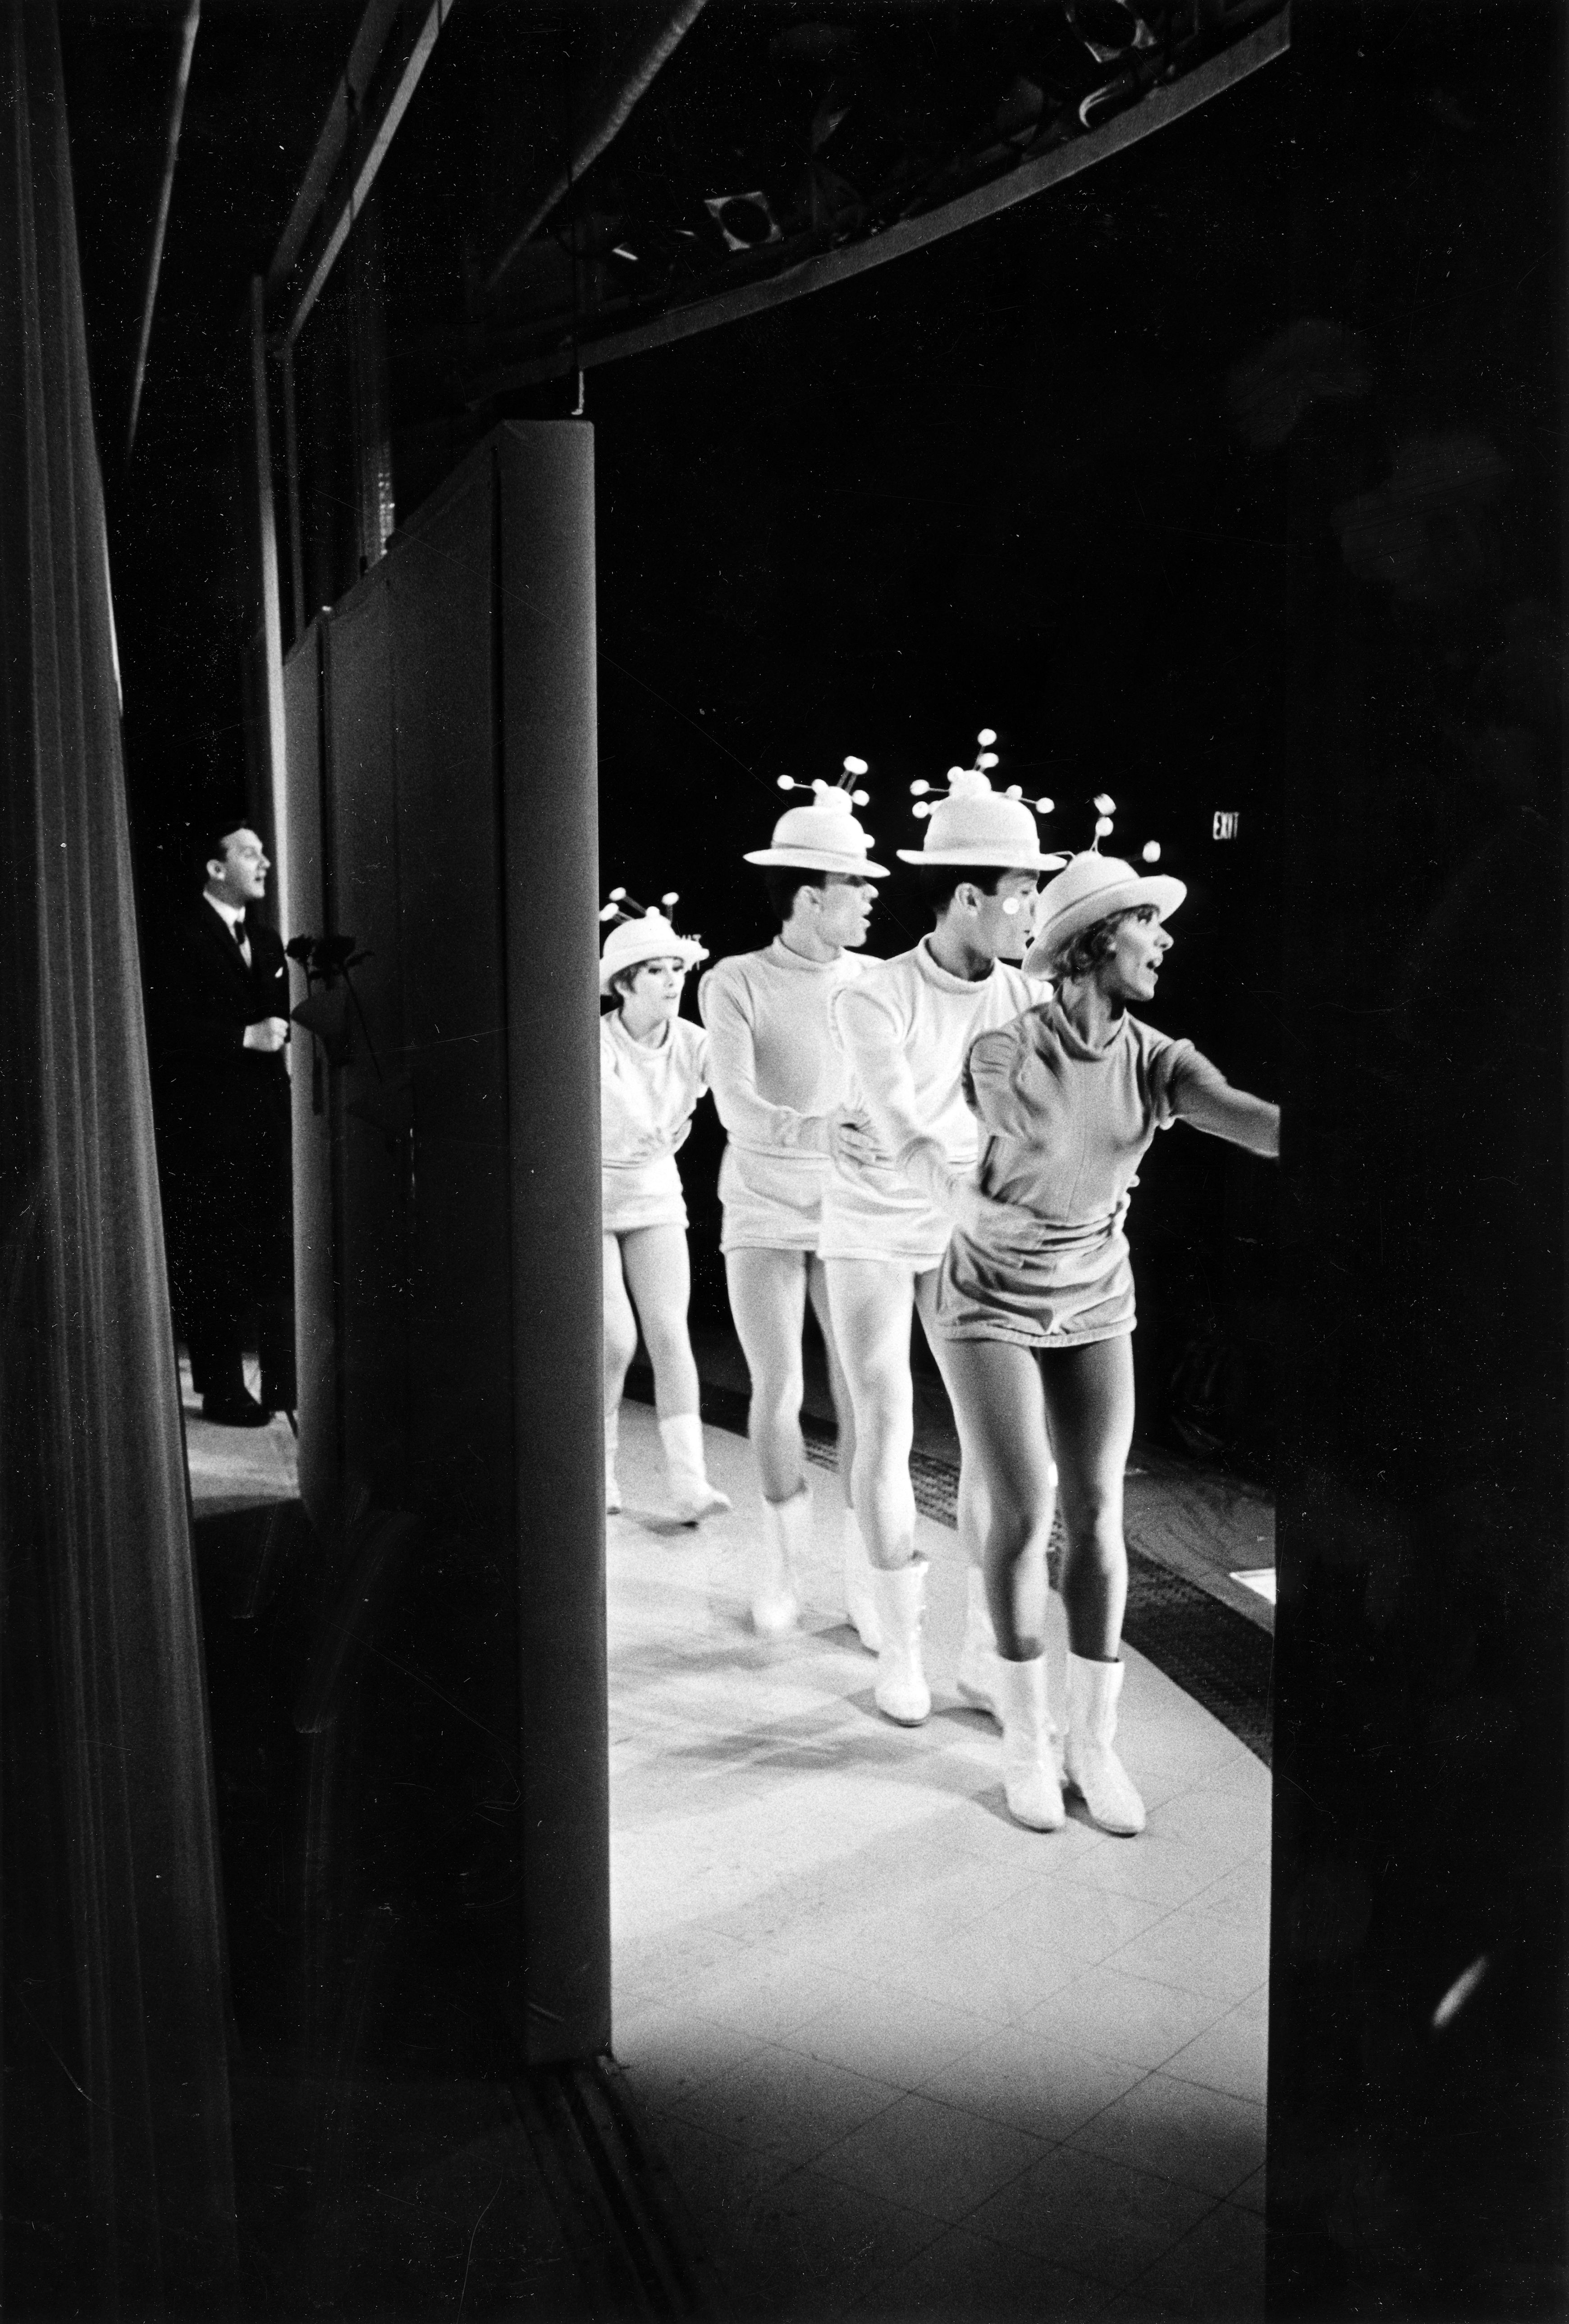 Black and white image of dancers dressed as moleculues performing on a stage.